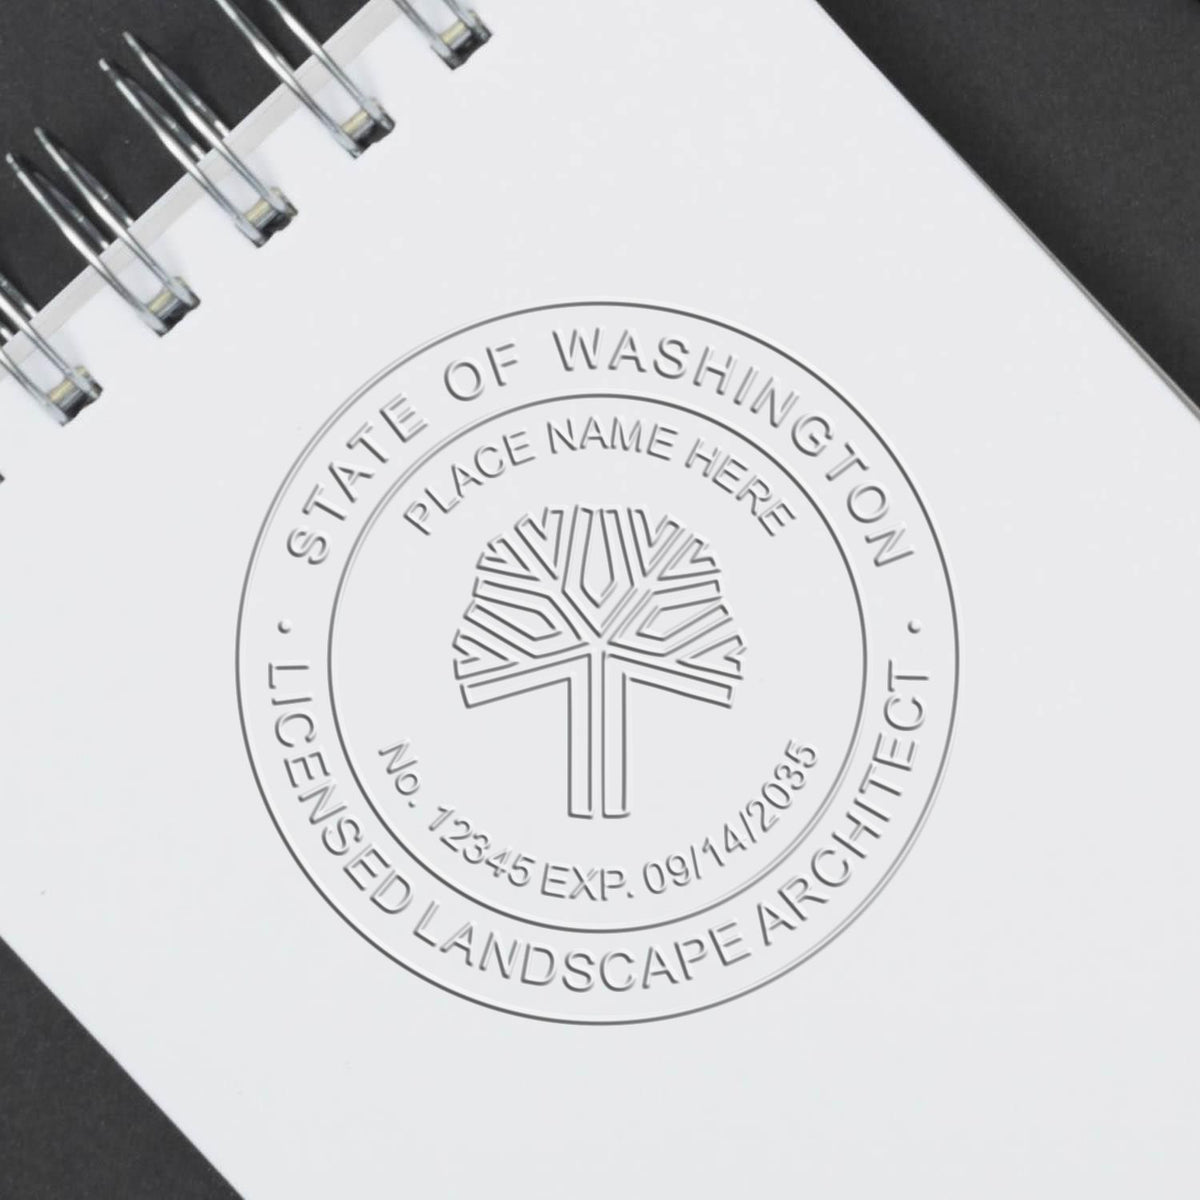 A photograph of the Hybrid Washington Landscape Architect Seal stamp impression reveals a vivid, professional image of the on paper.